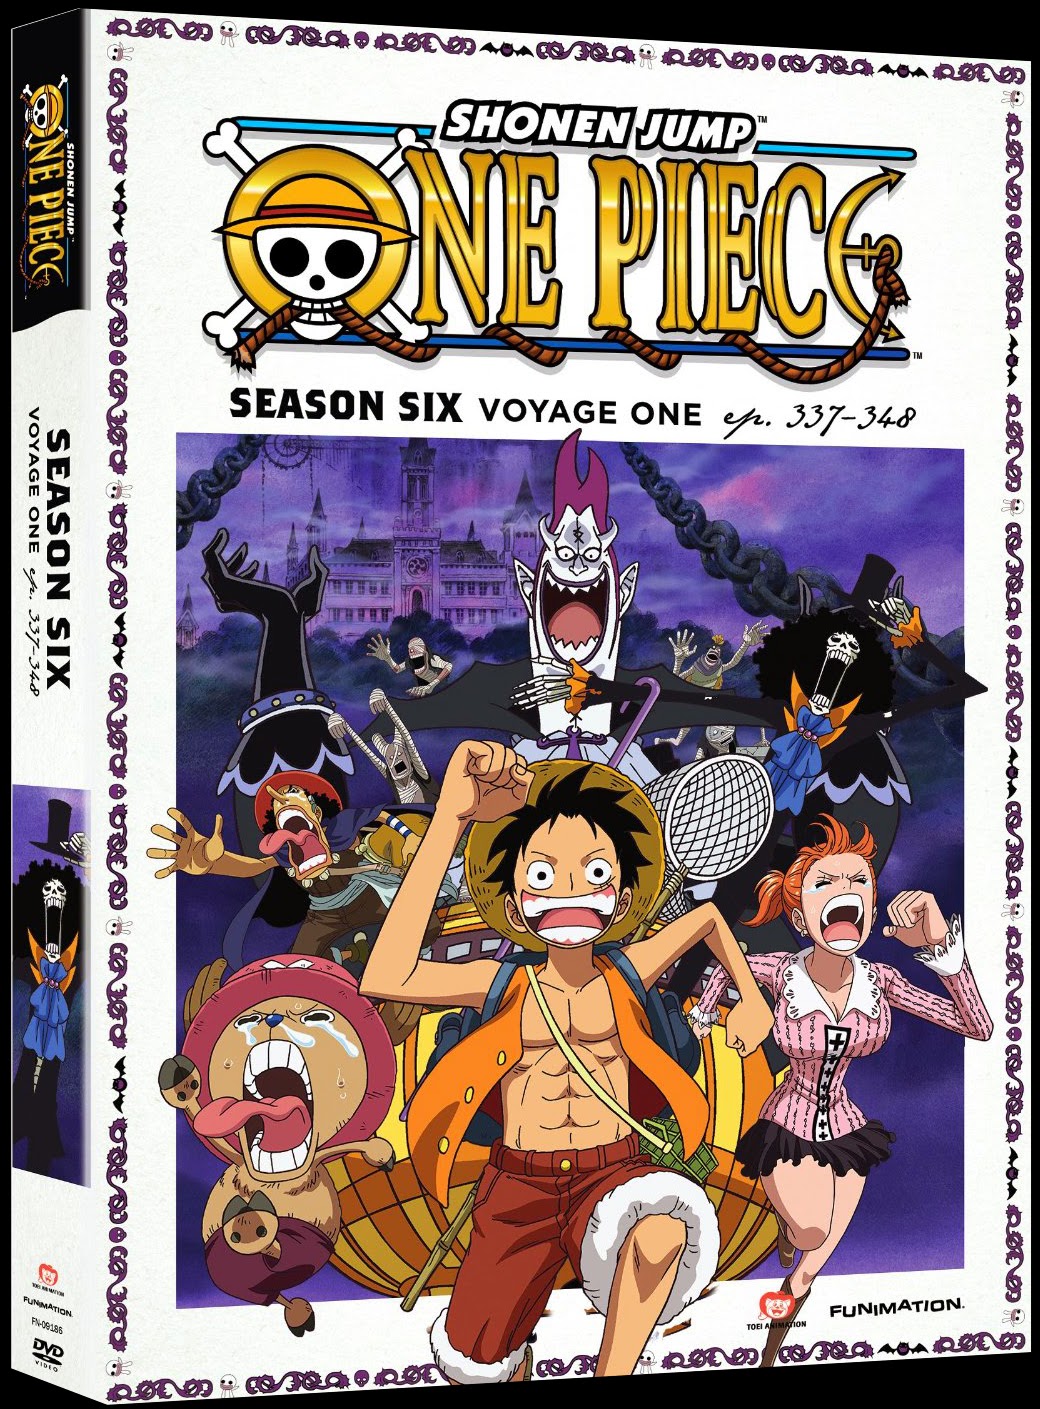 One Piece Download Link 2014 622so on - Home Facebook